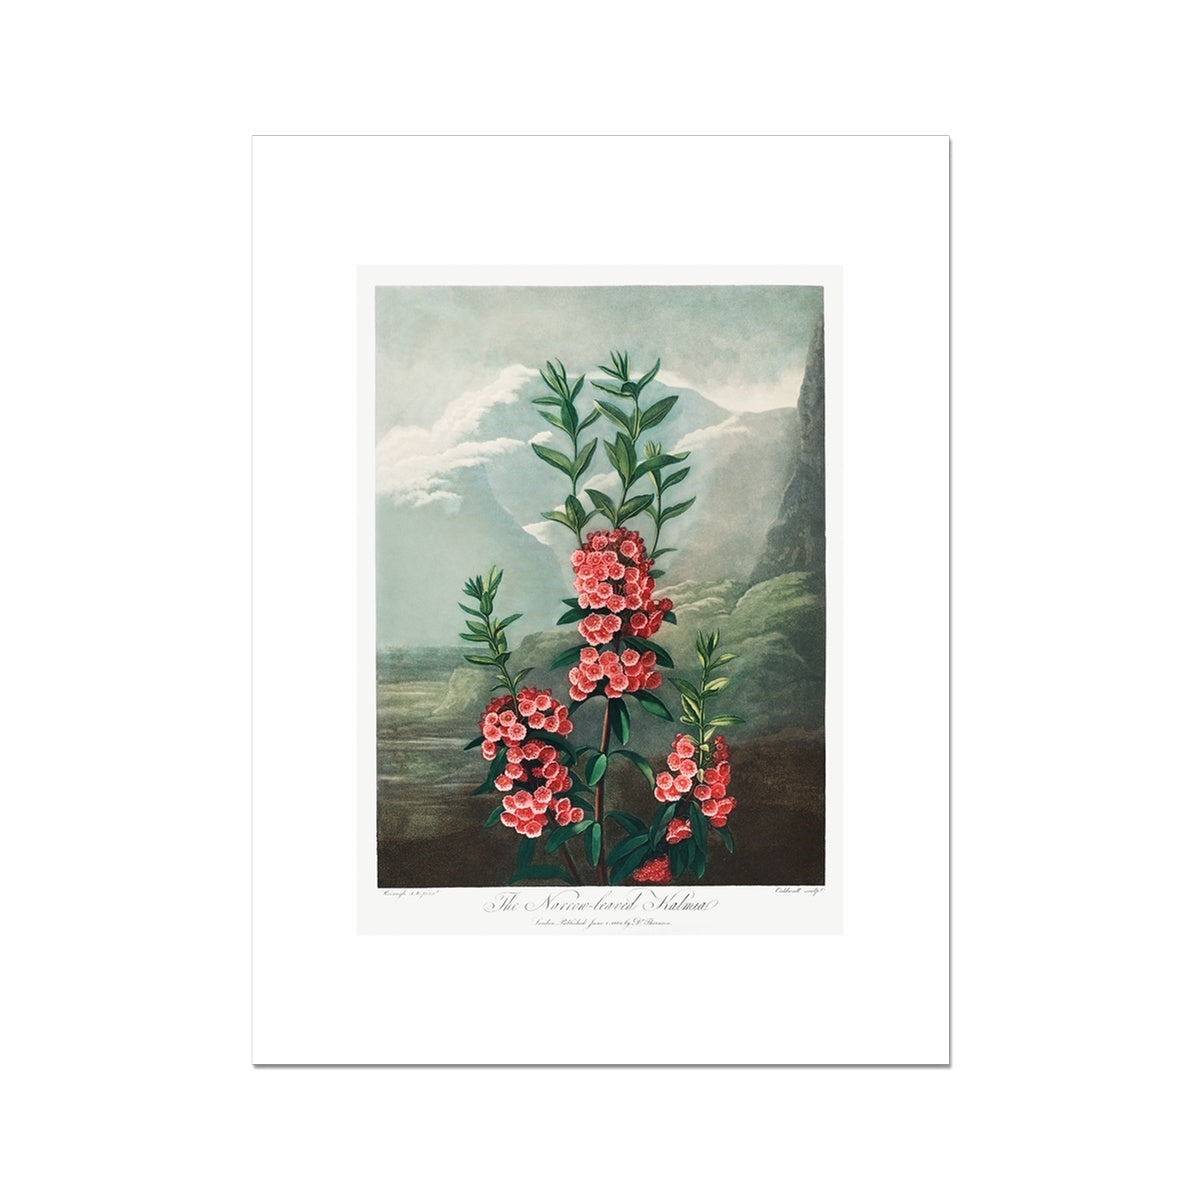 The Narrow–Leaved Kalmia from The Temple of Flora (1807) by Robert John Thornton Fine Art Print